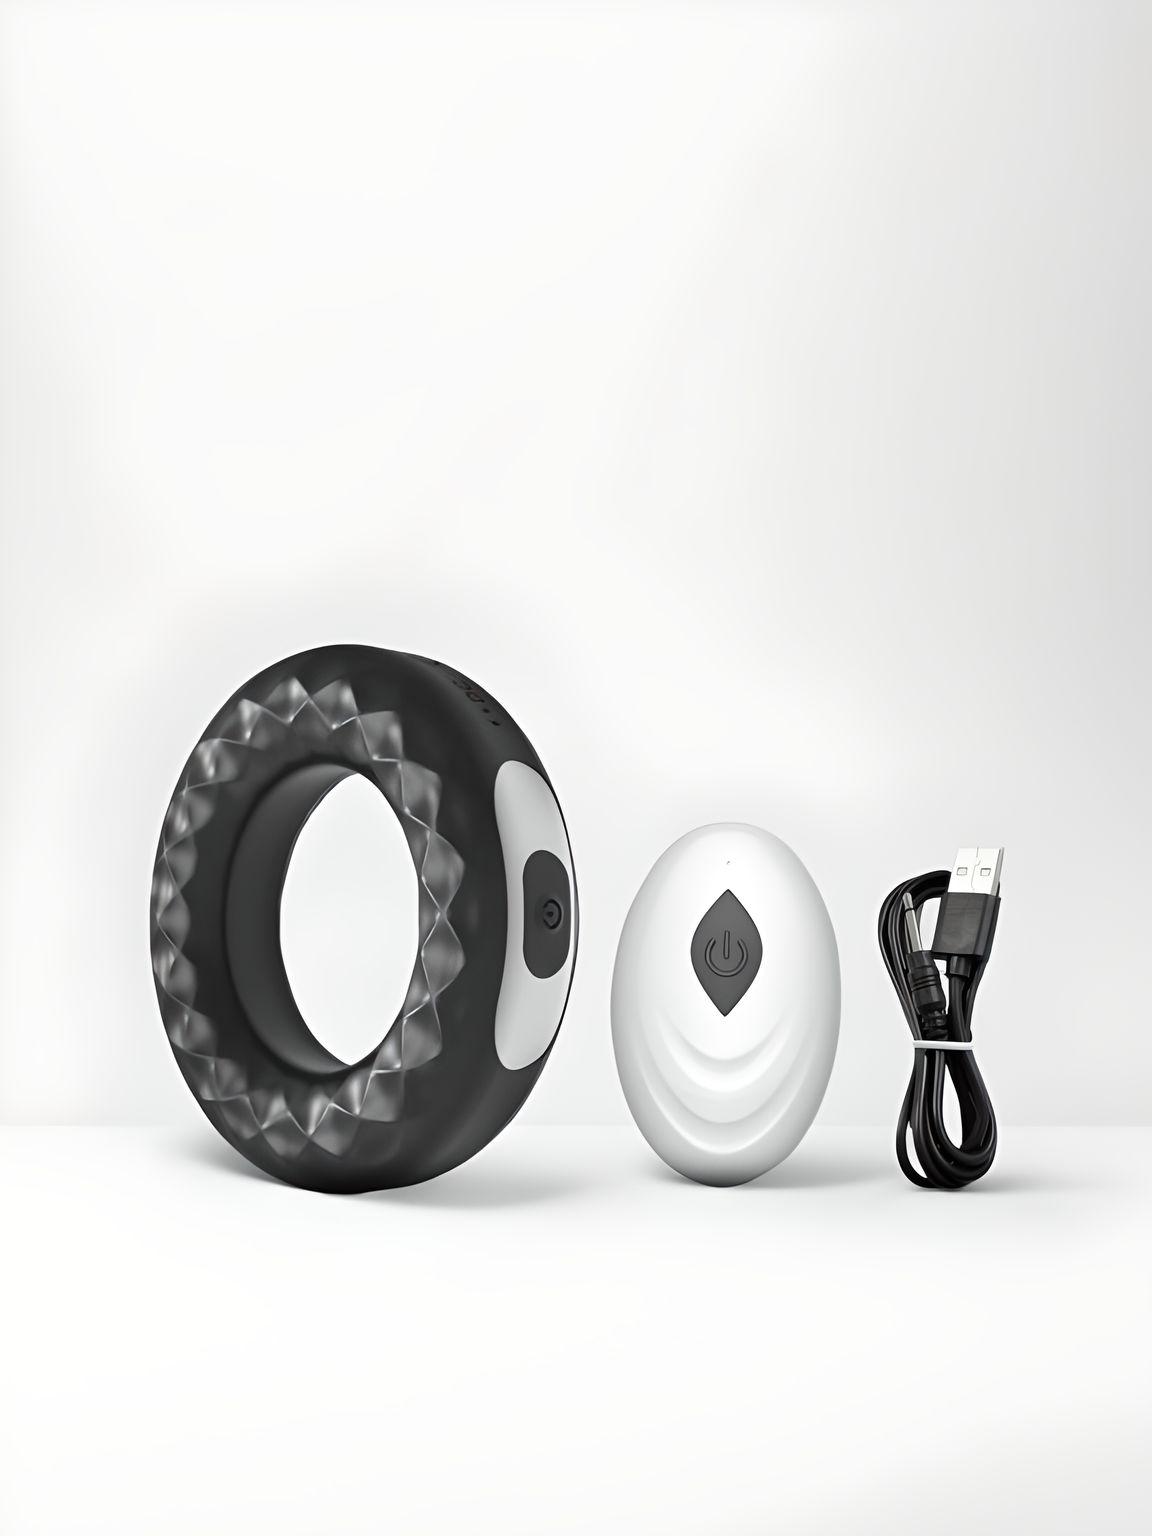 a black and white object is next to a black and white object